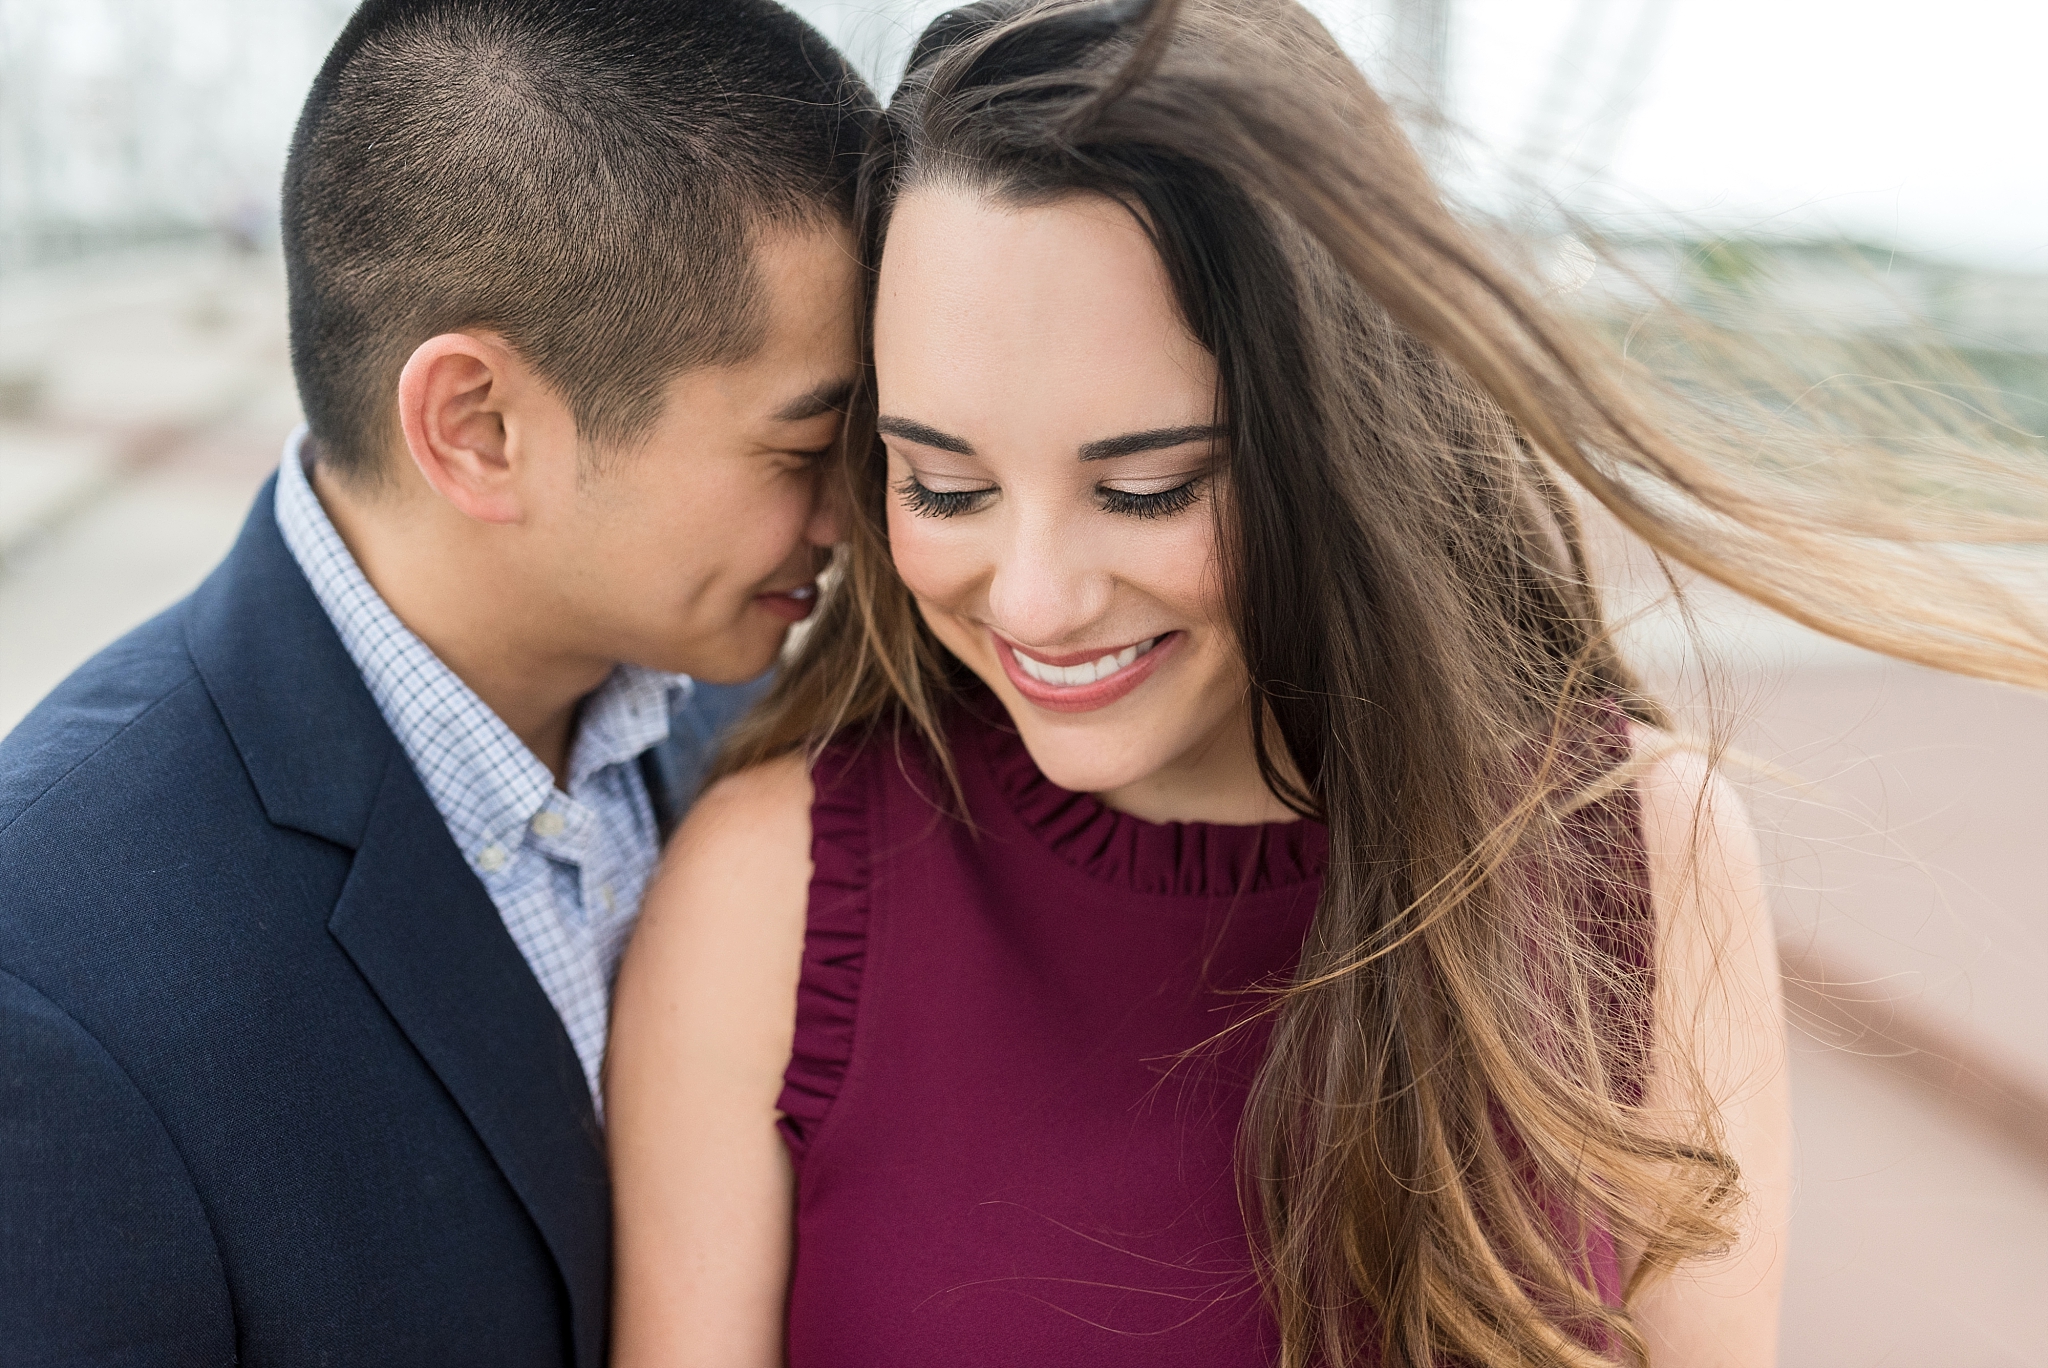 Wind blowing in hair Nashville engagement session